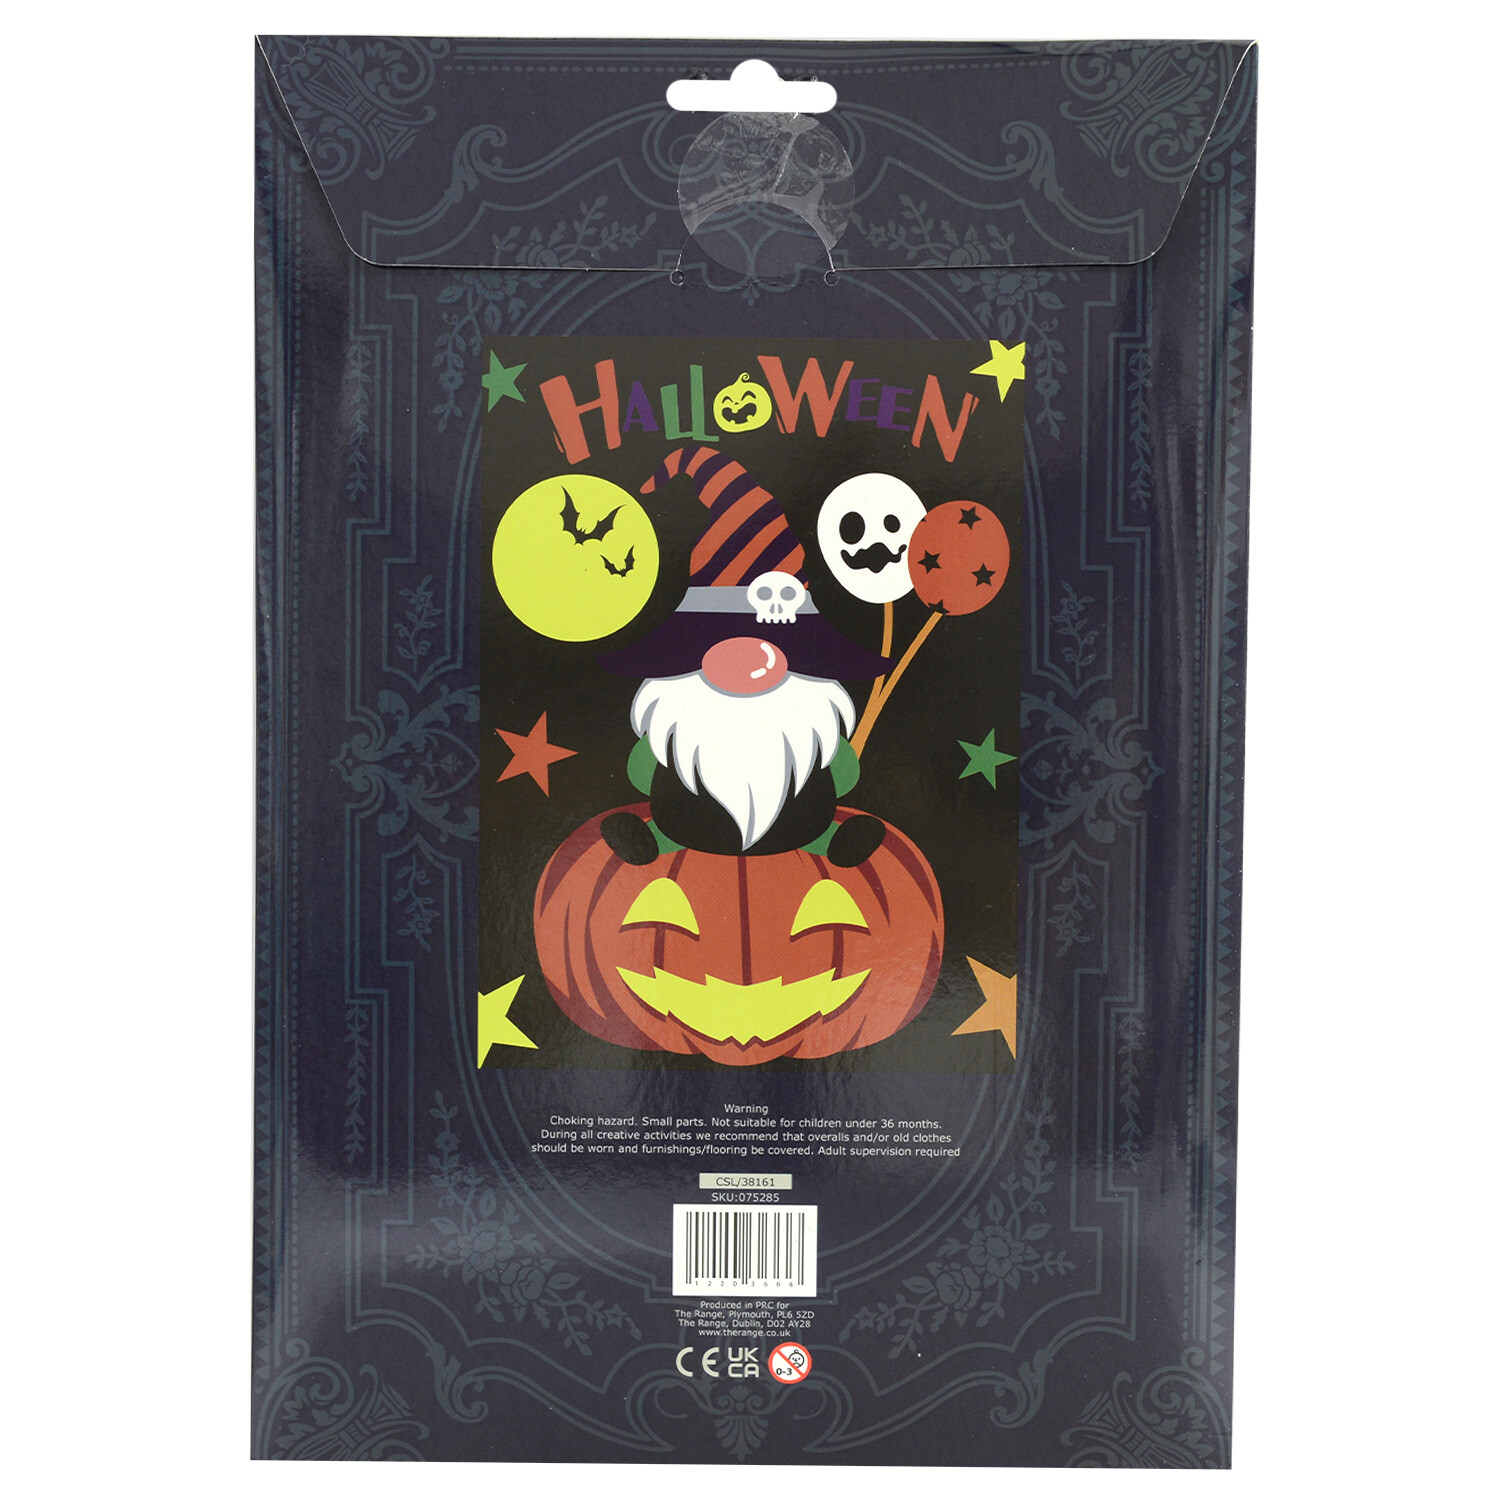 Haunted Hallows Paint Your Own Spooky Halloween Canvas Kit Image 2